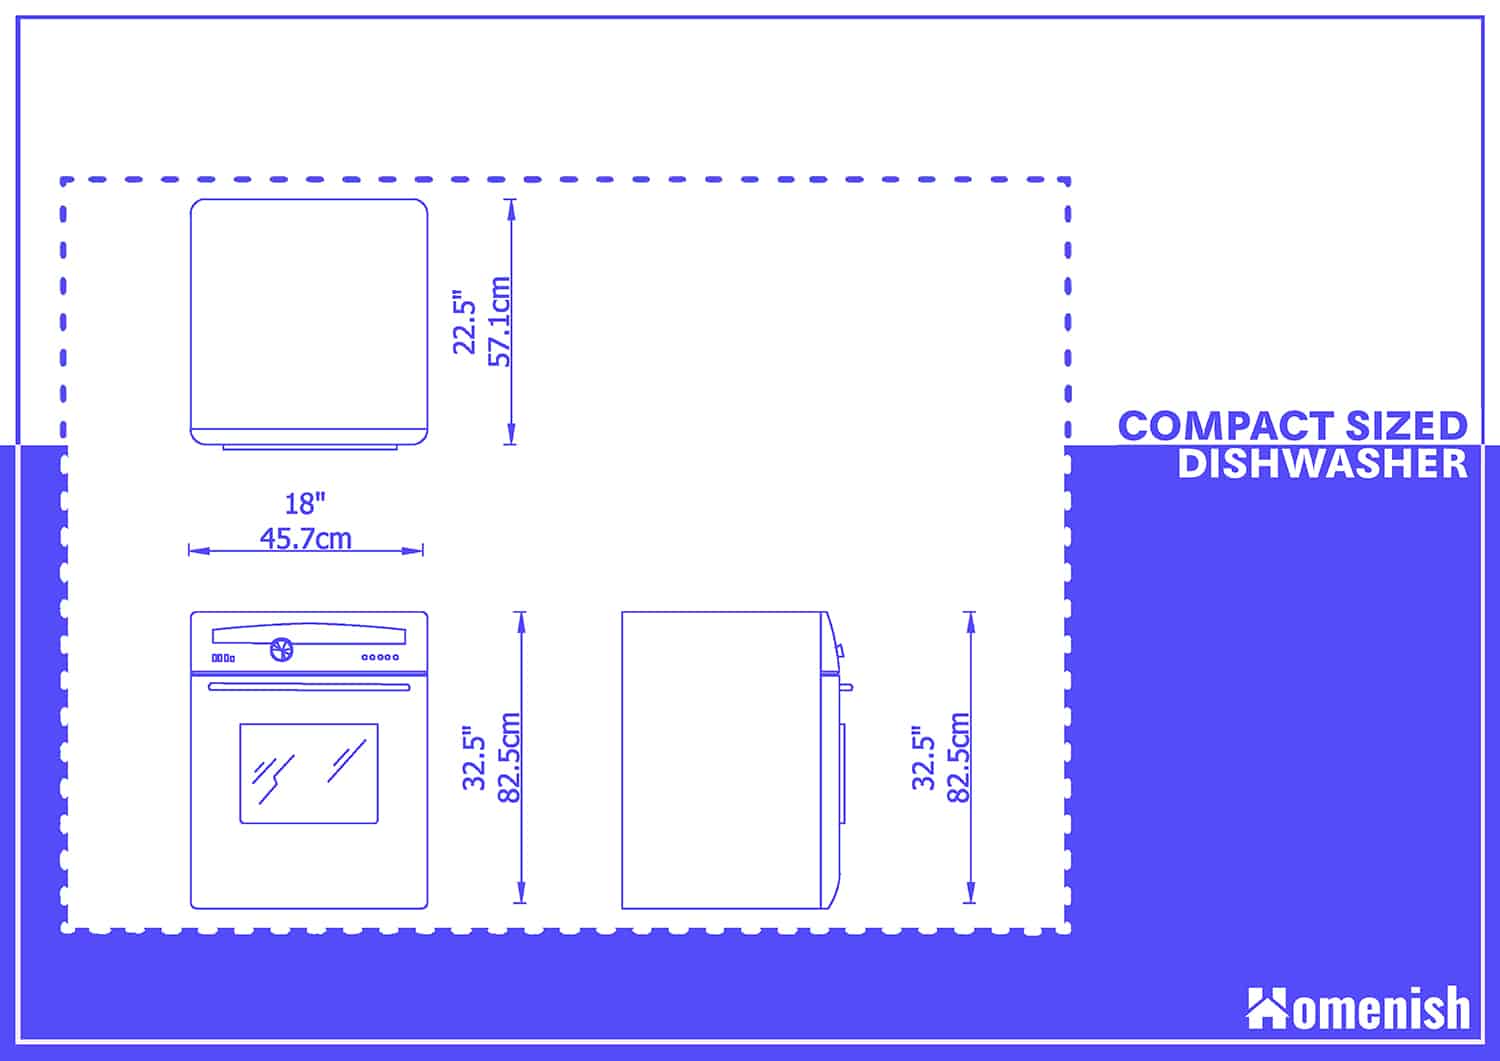 Compact Sized Dishwasher Dimensions